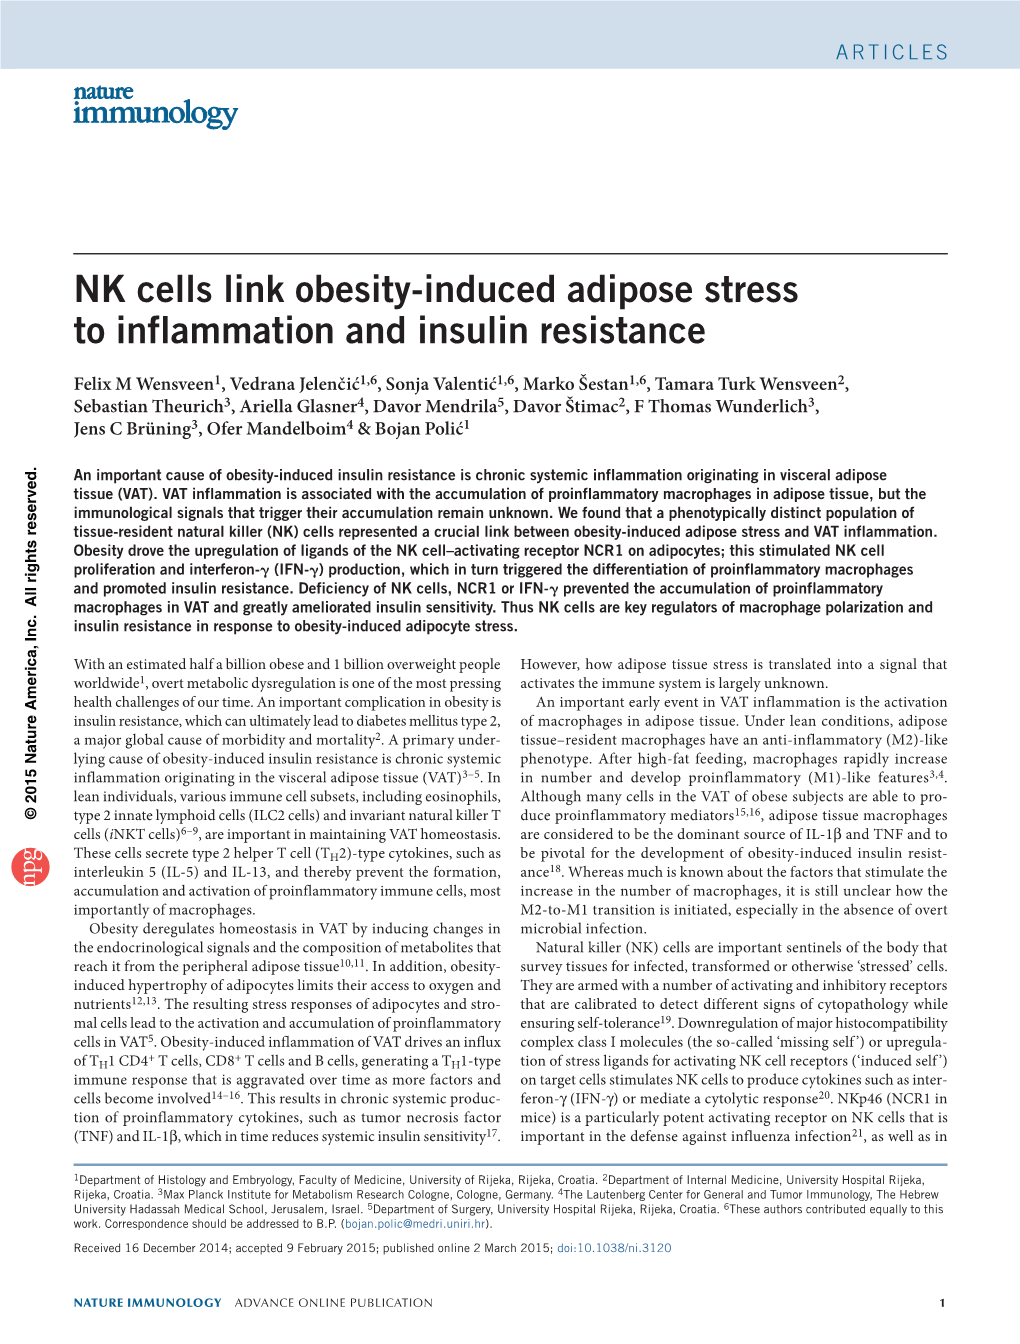 NK Cells Link Obesity-Induced Adipose Stress to Inflammation and Insulin